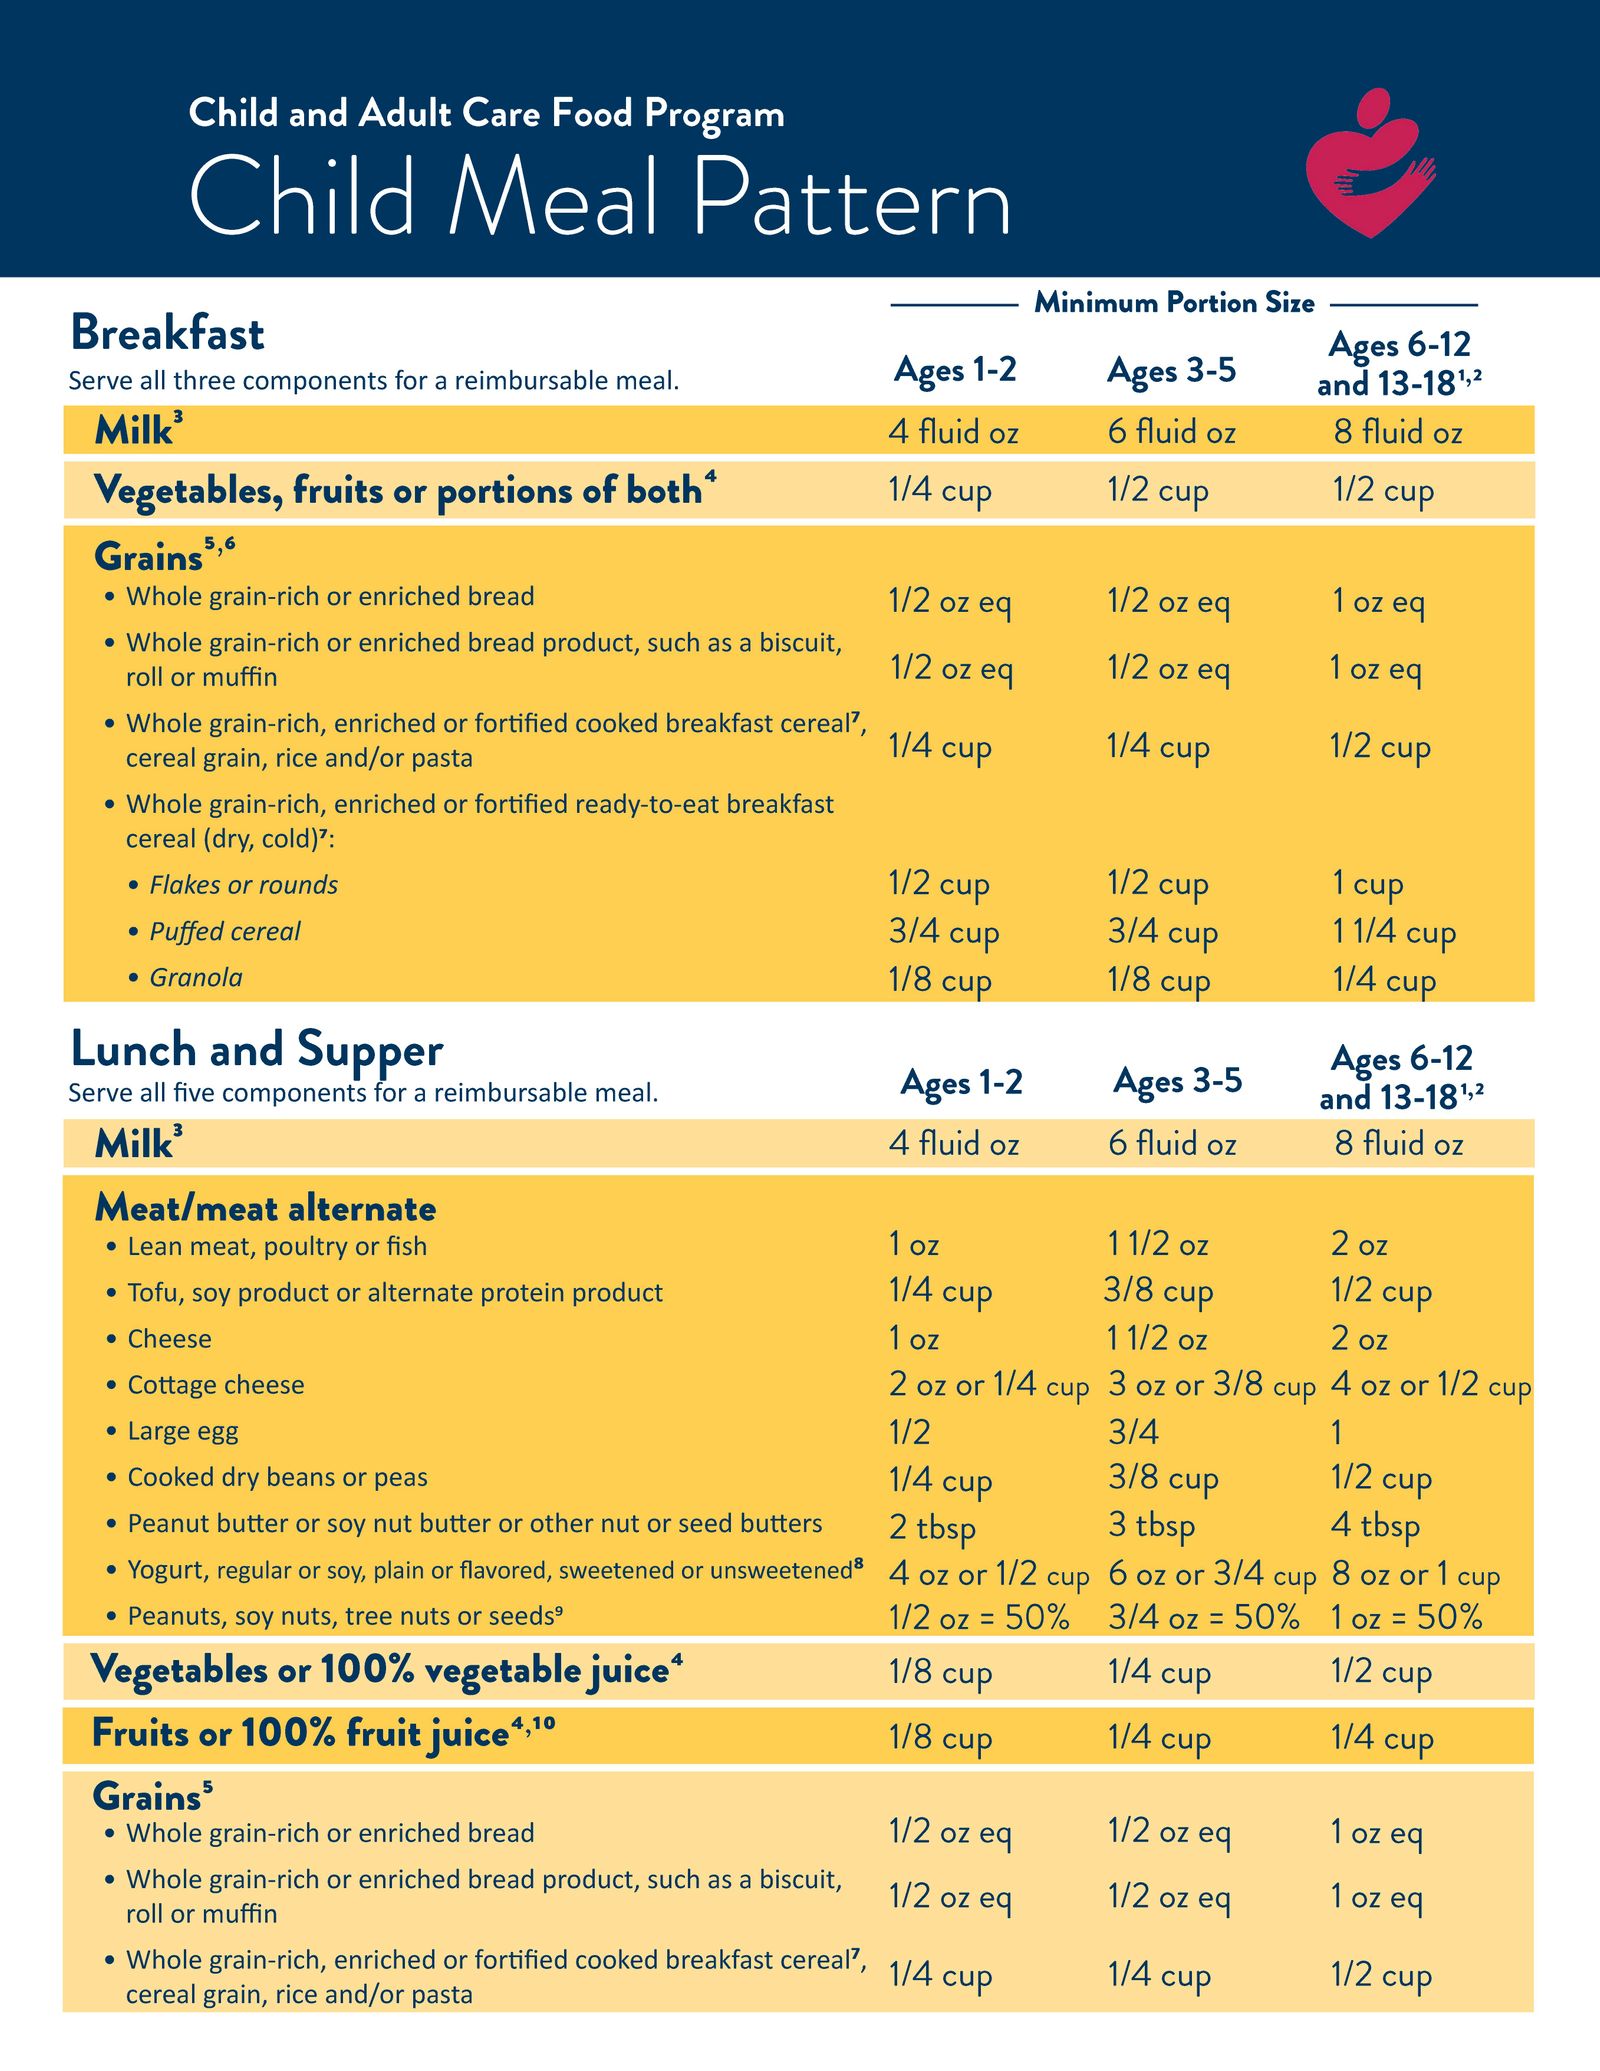 Child Meal Patterns Meal Pattern Guidelines Getting Started Child